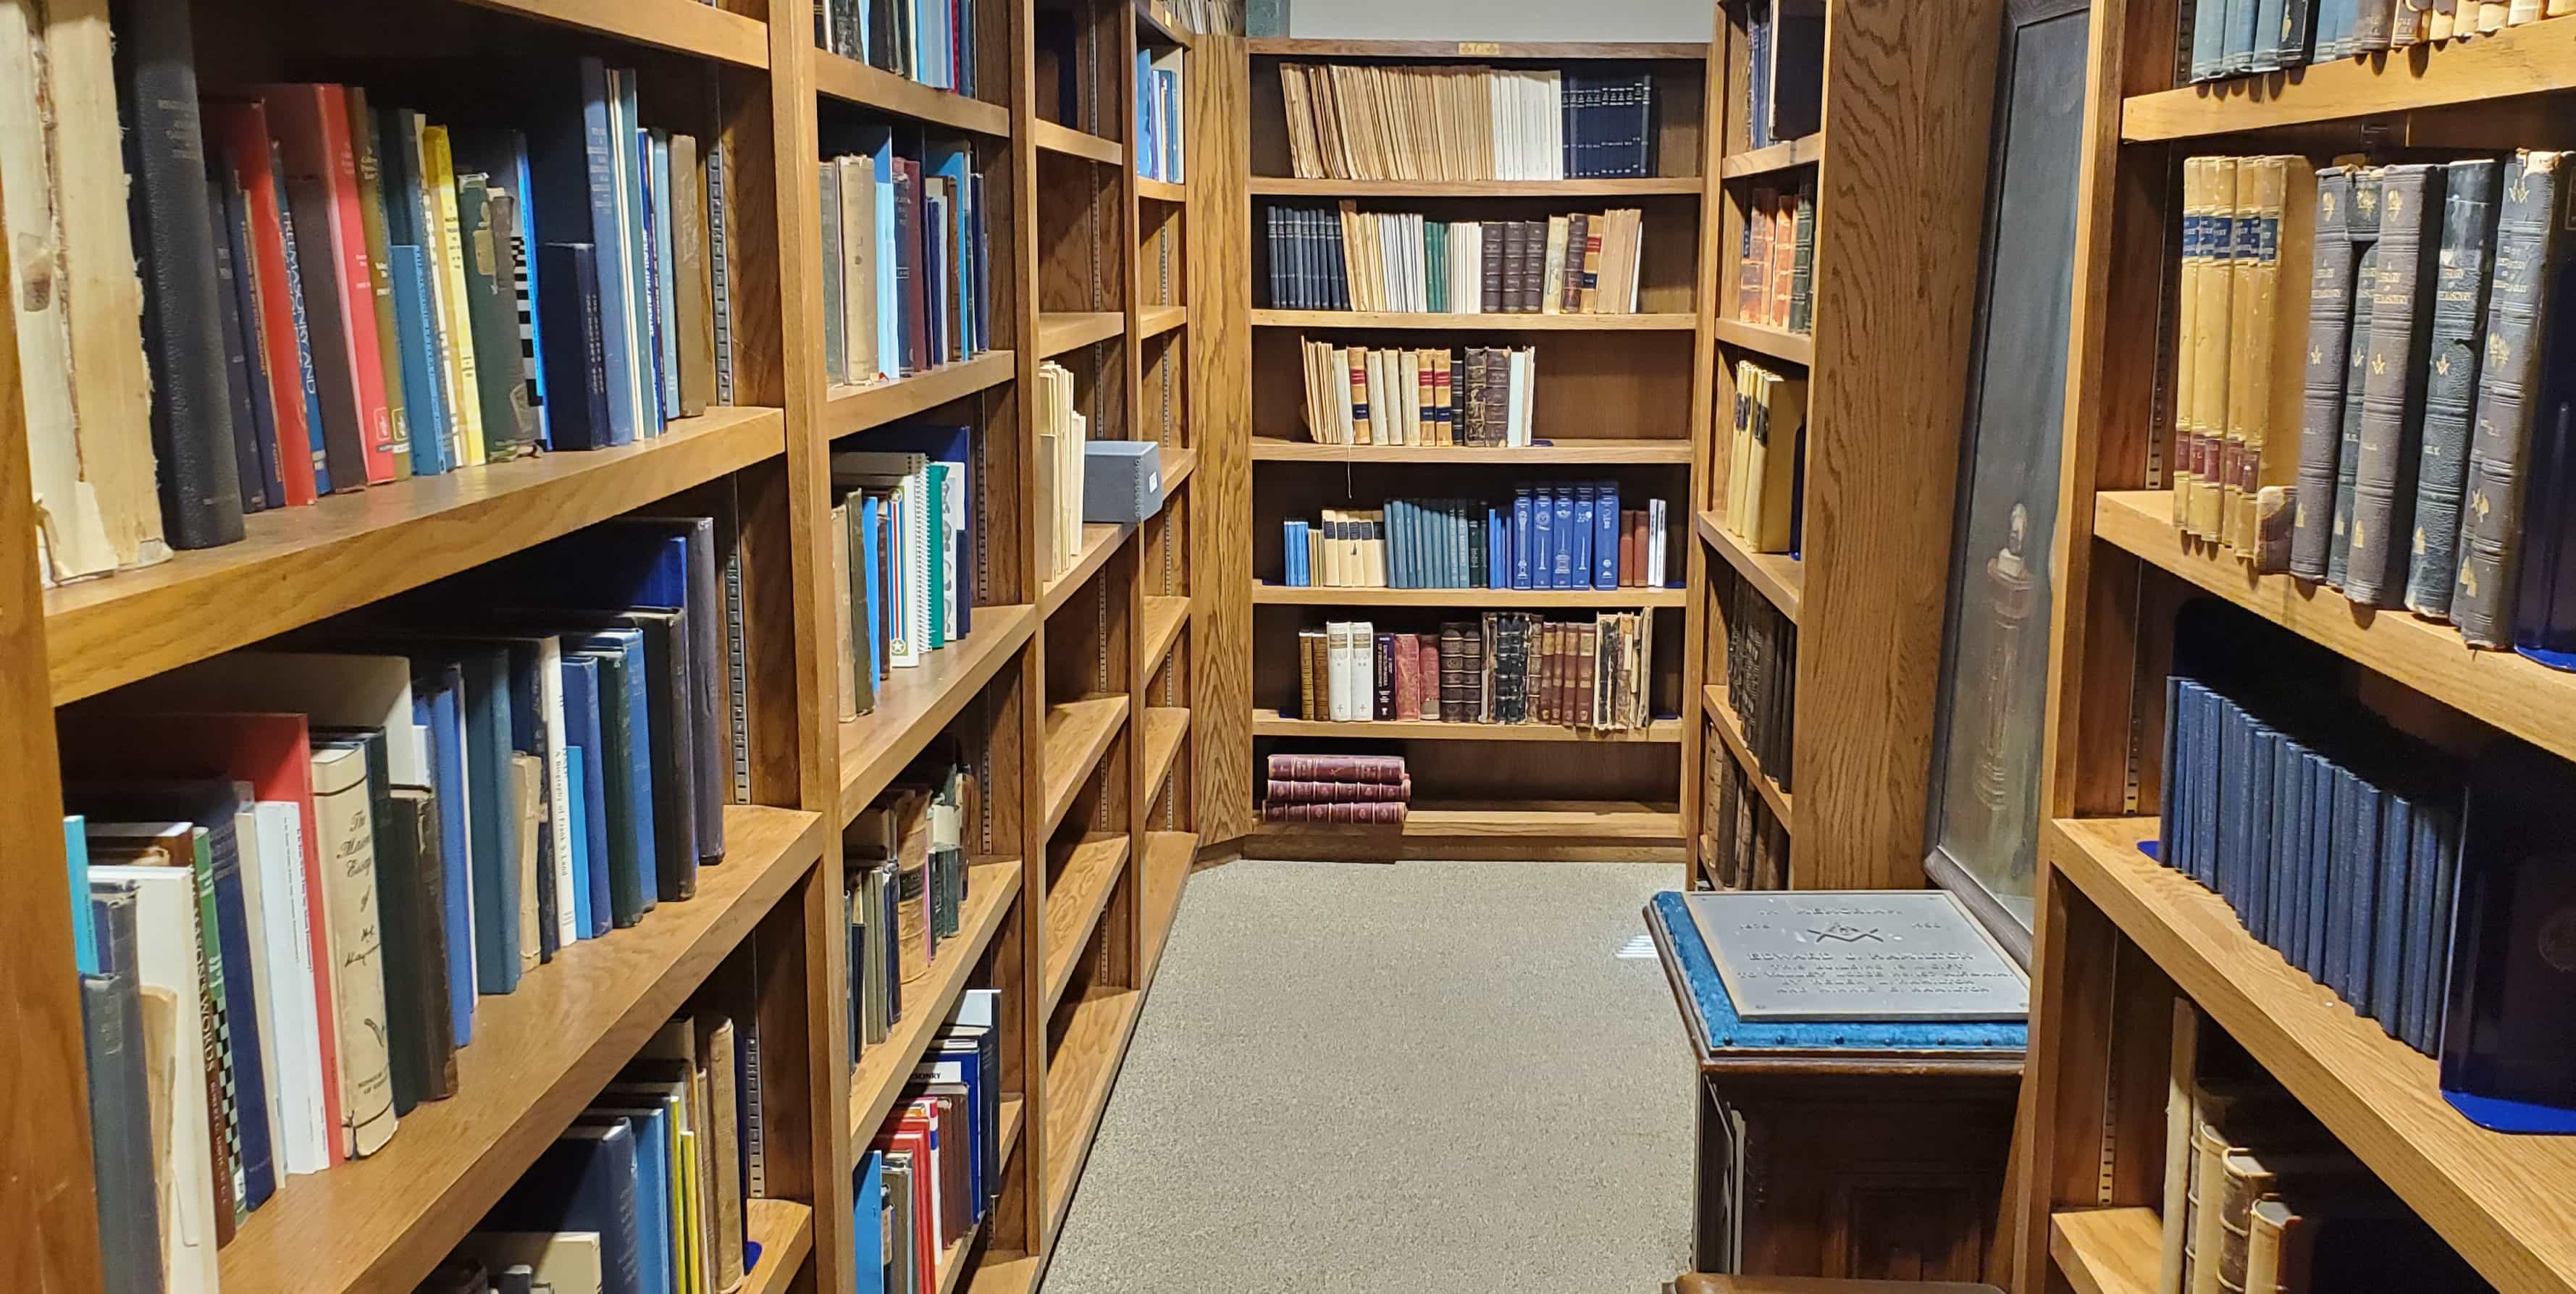 Tour the Library/Museum